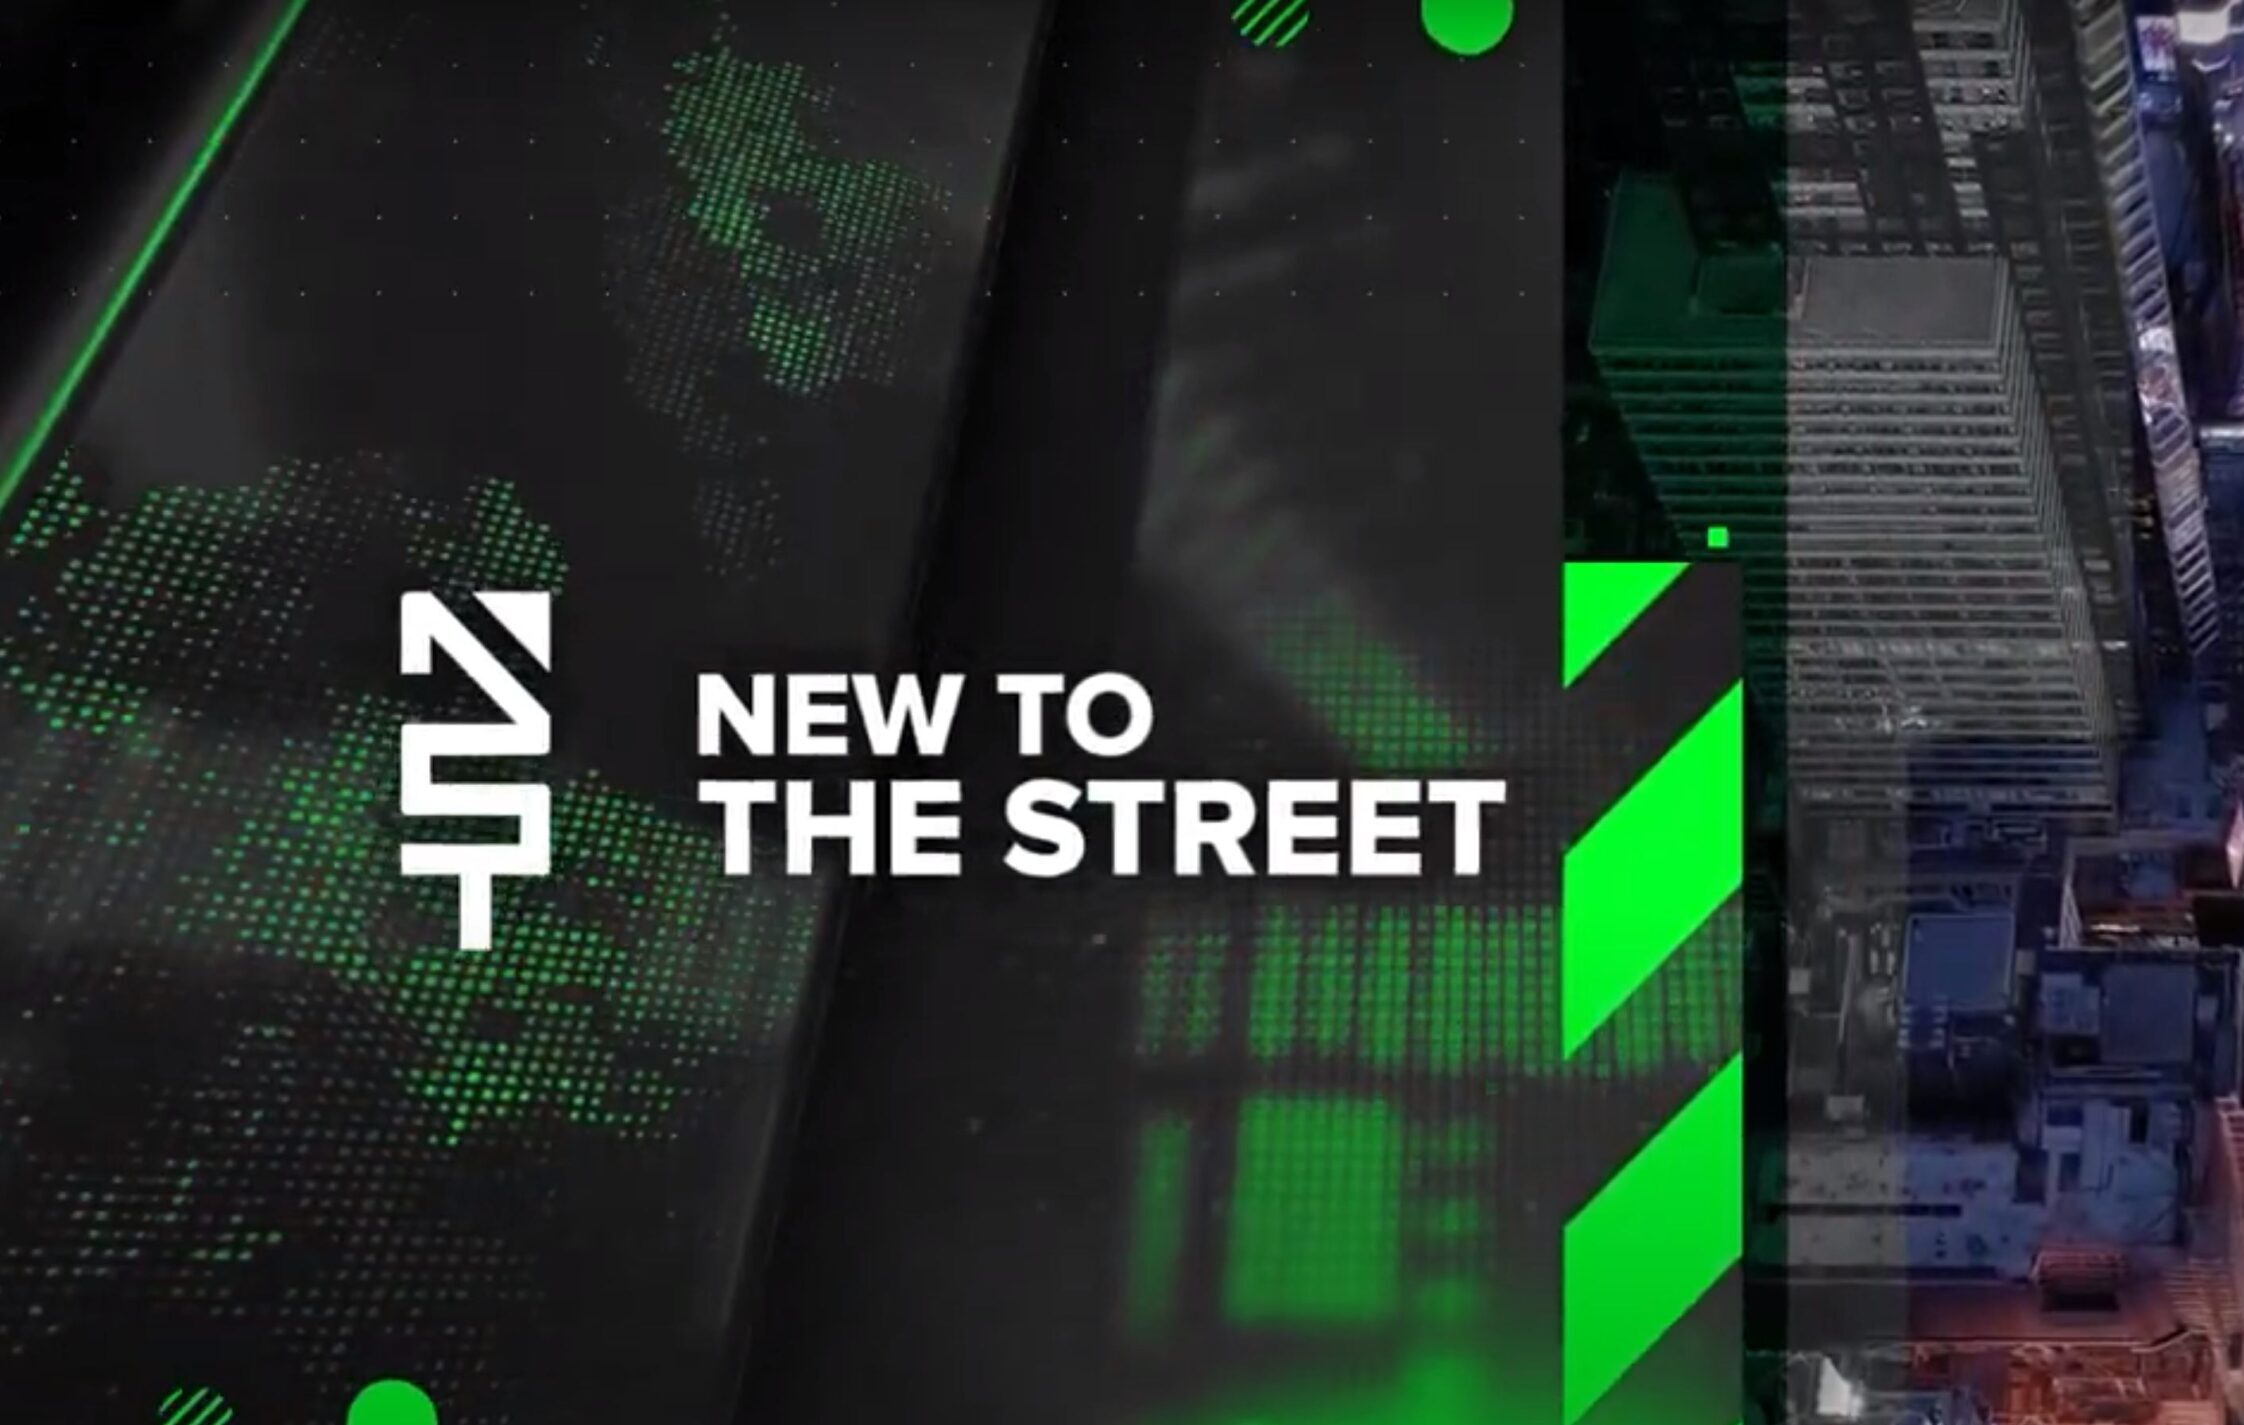 NEW TO THE STREET Interview in the Field